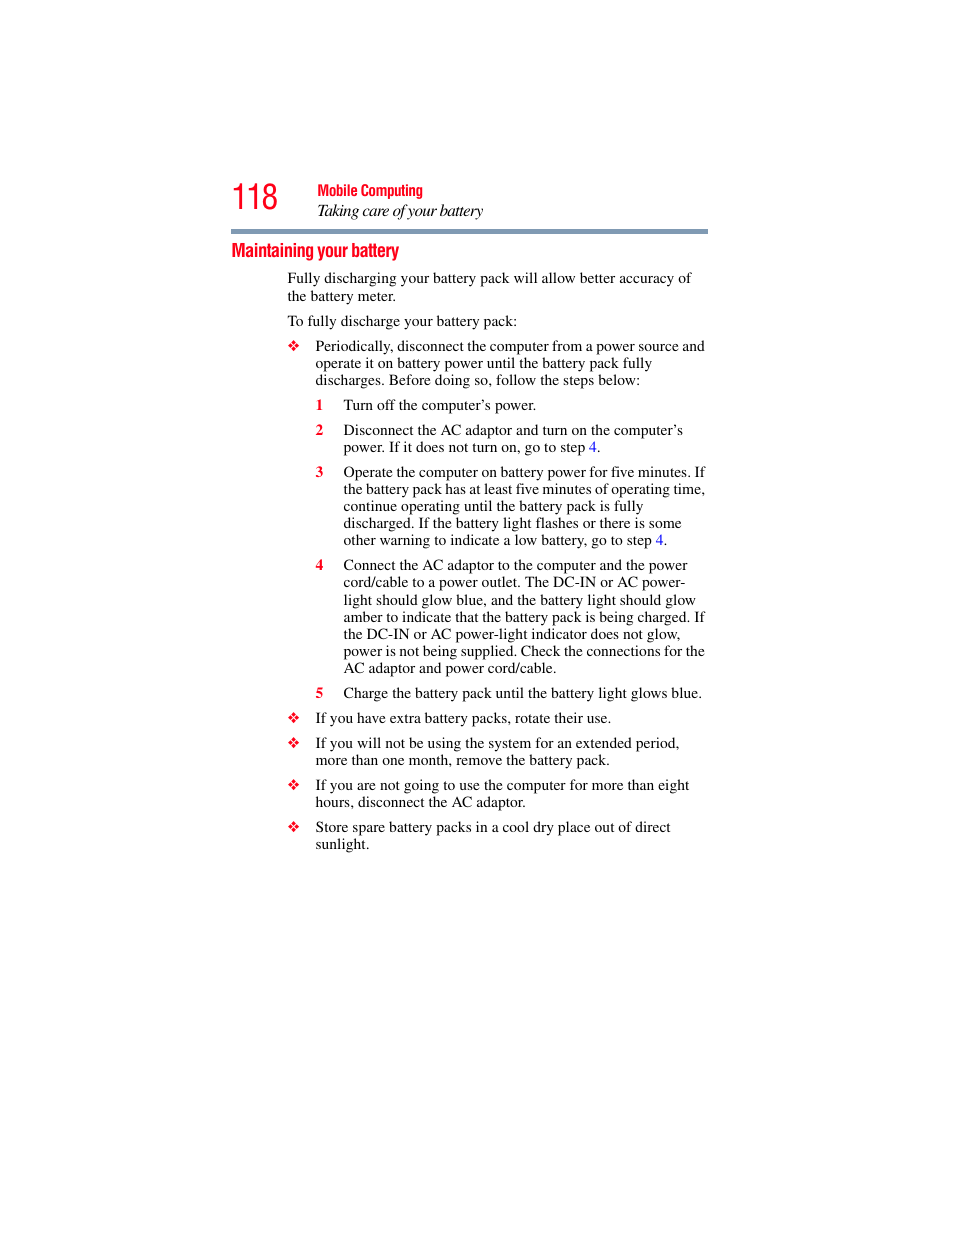 Maintaining your battery | Toshiba A200 User Manual | Page 118 / 244